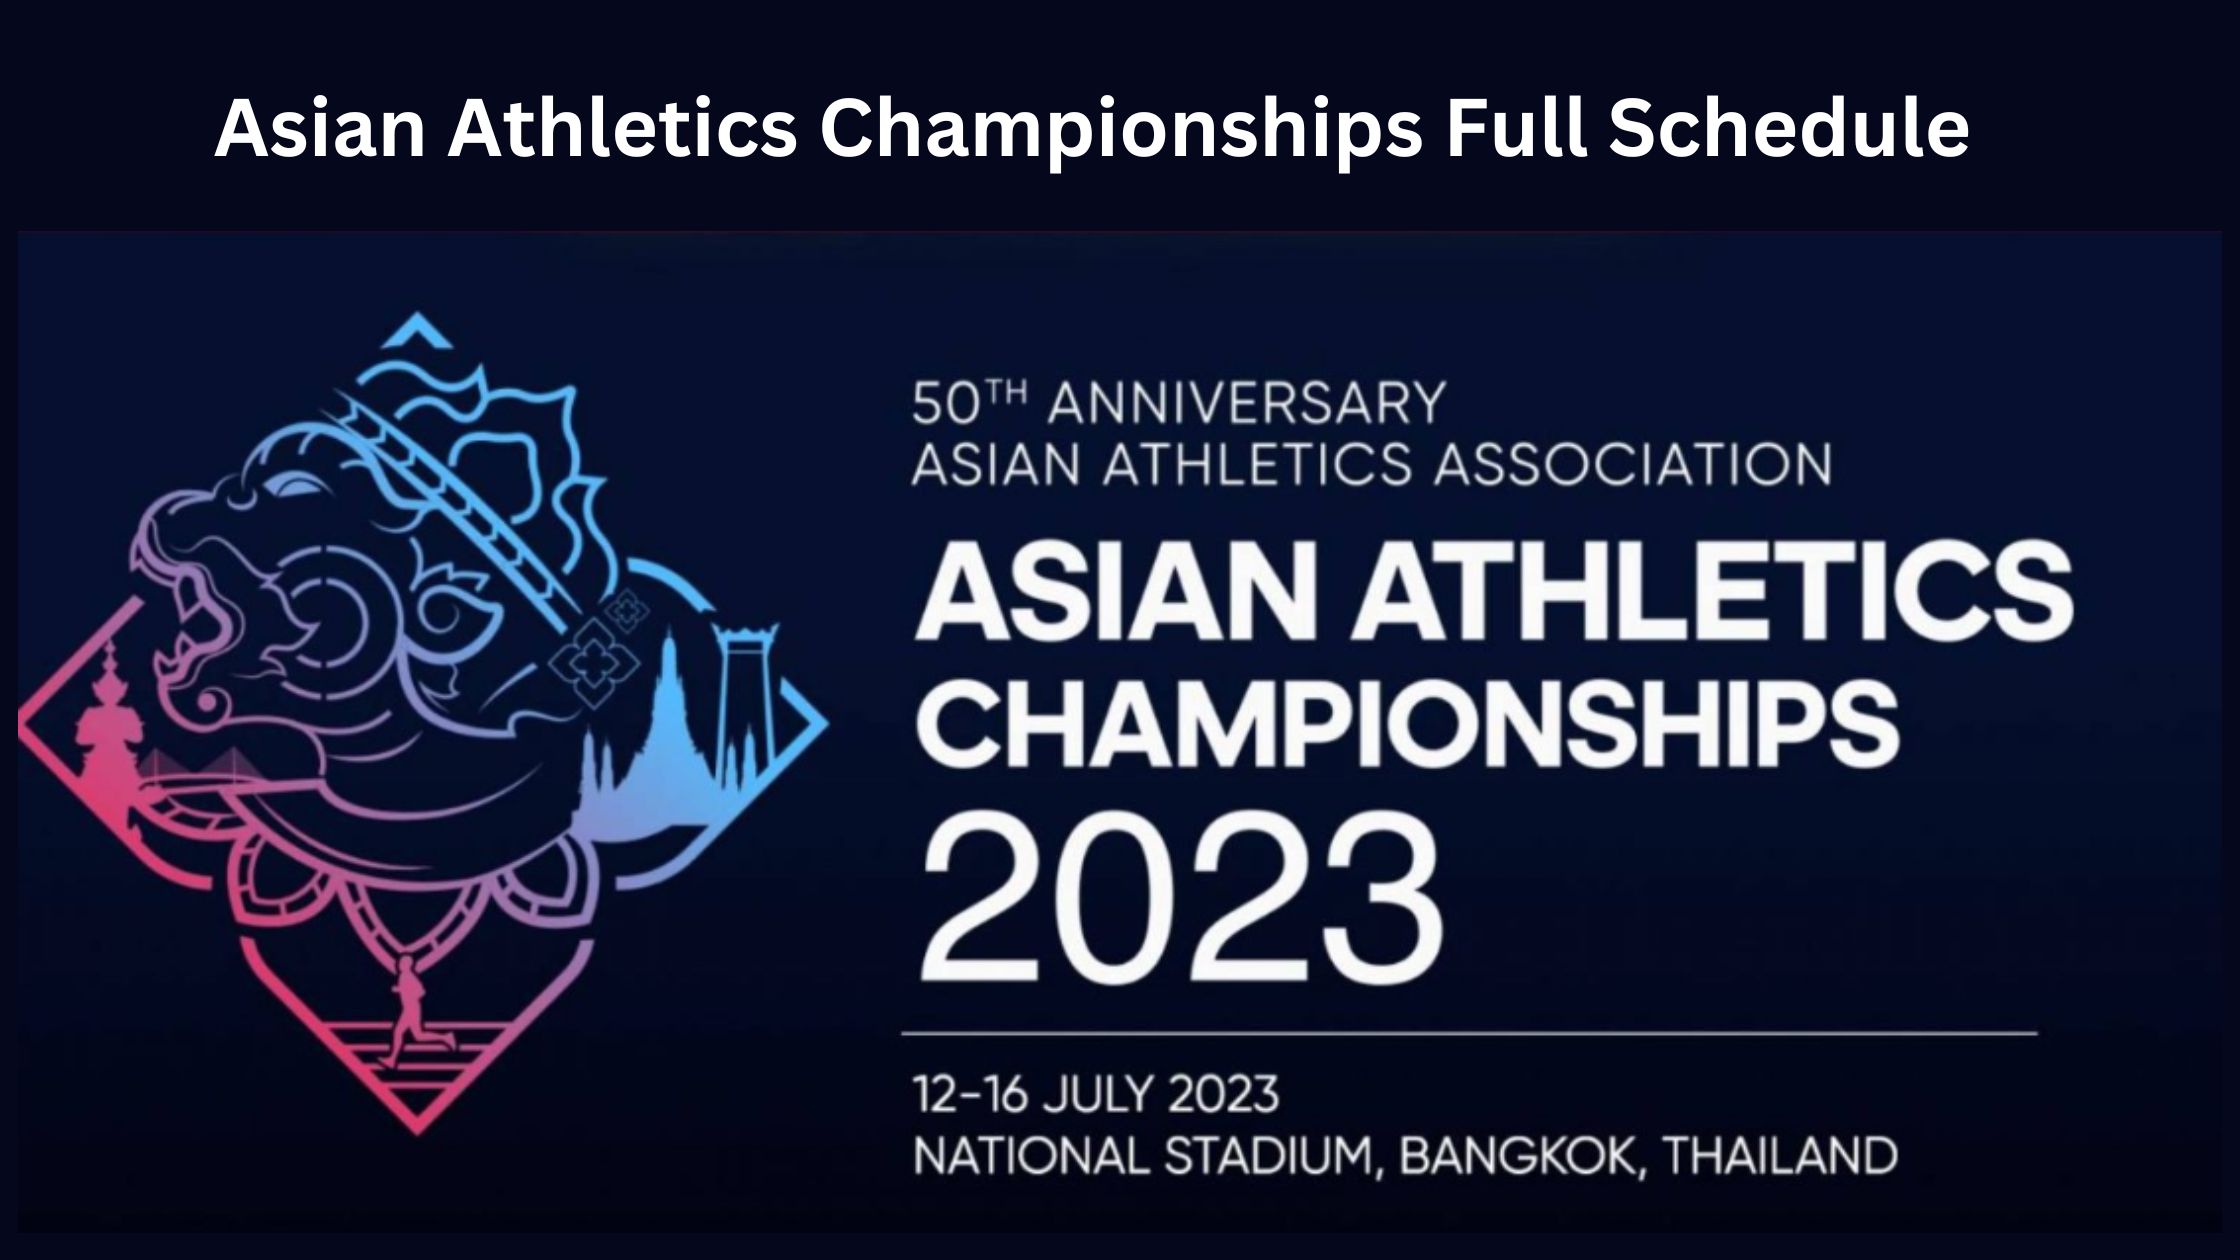 Asian Athletics Championships 2023: Full schedule